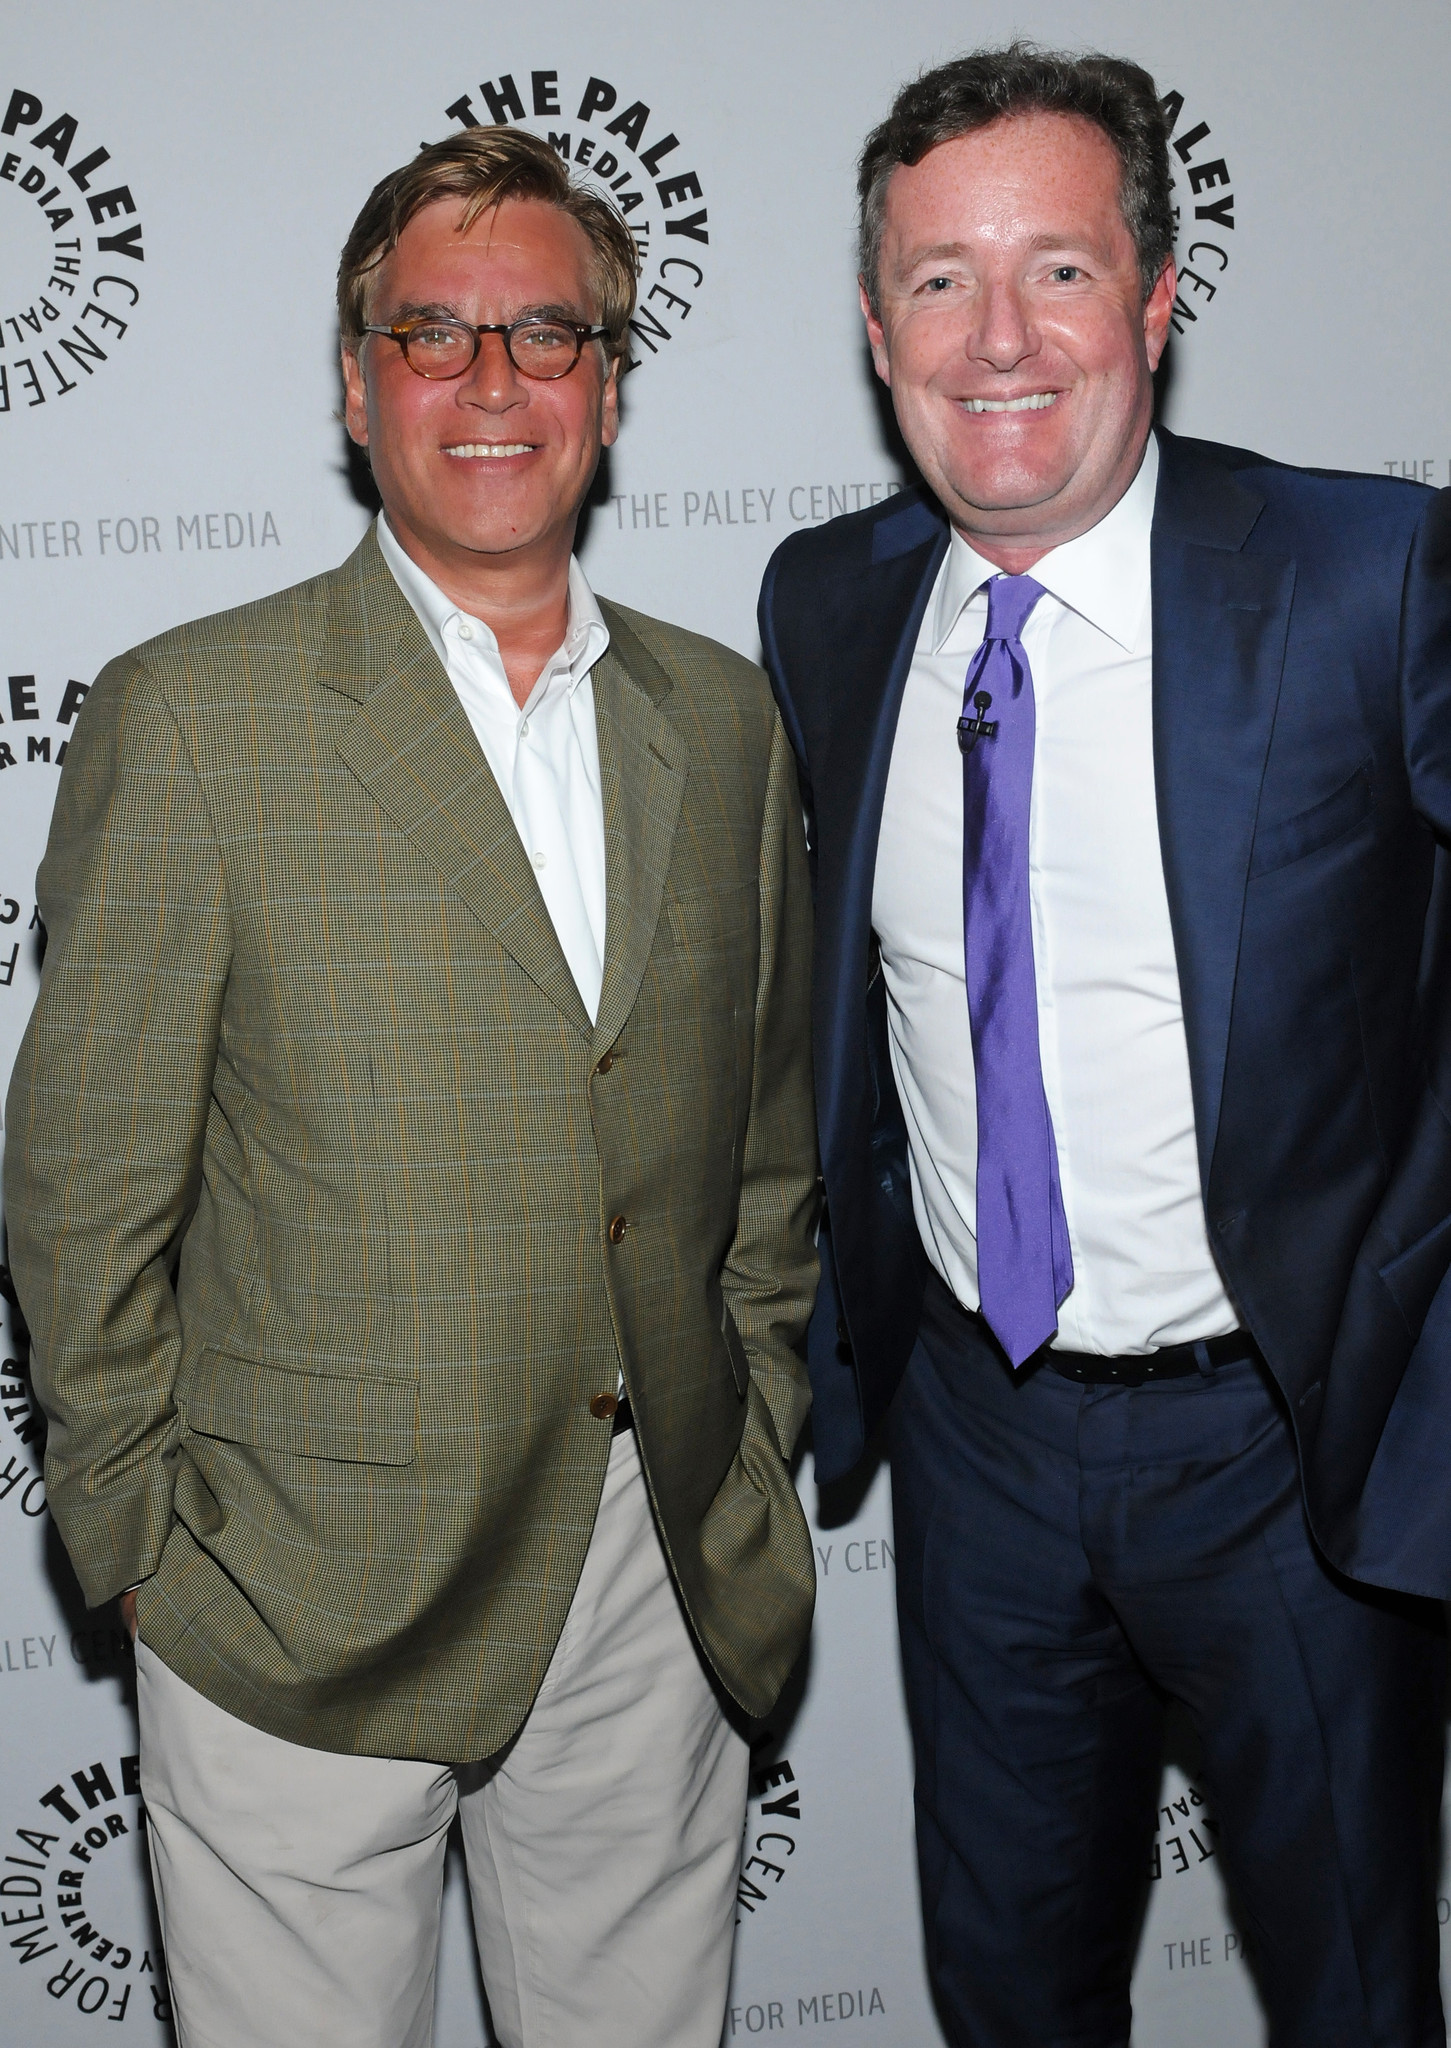 Piers Morgan and Aaron Sorkin at event of The Newsroom (2012)